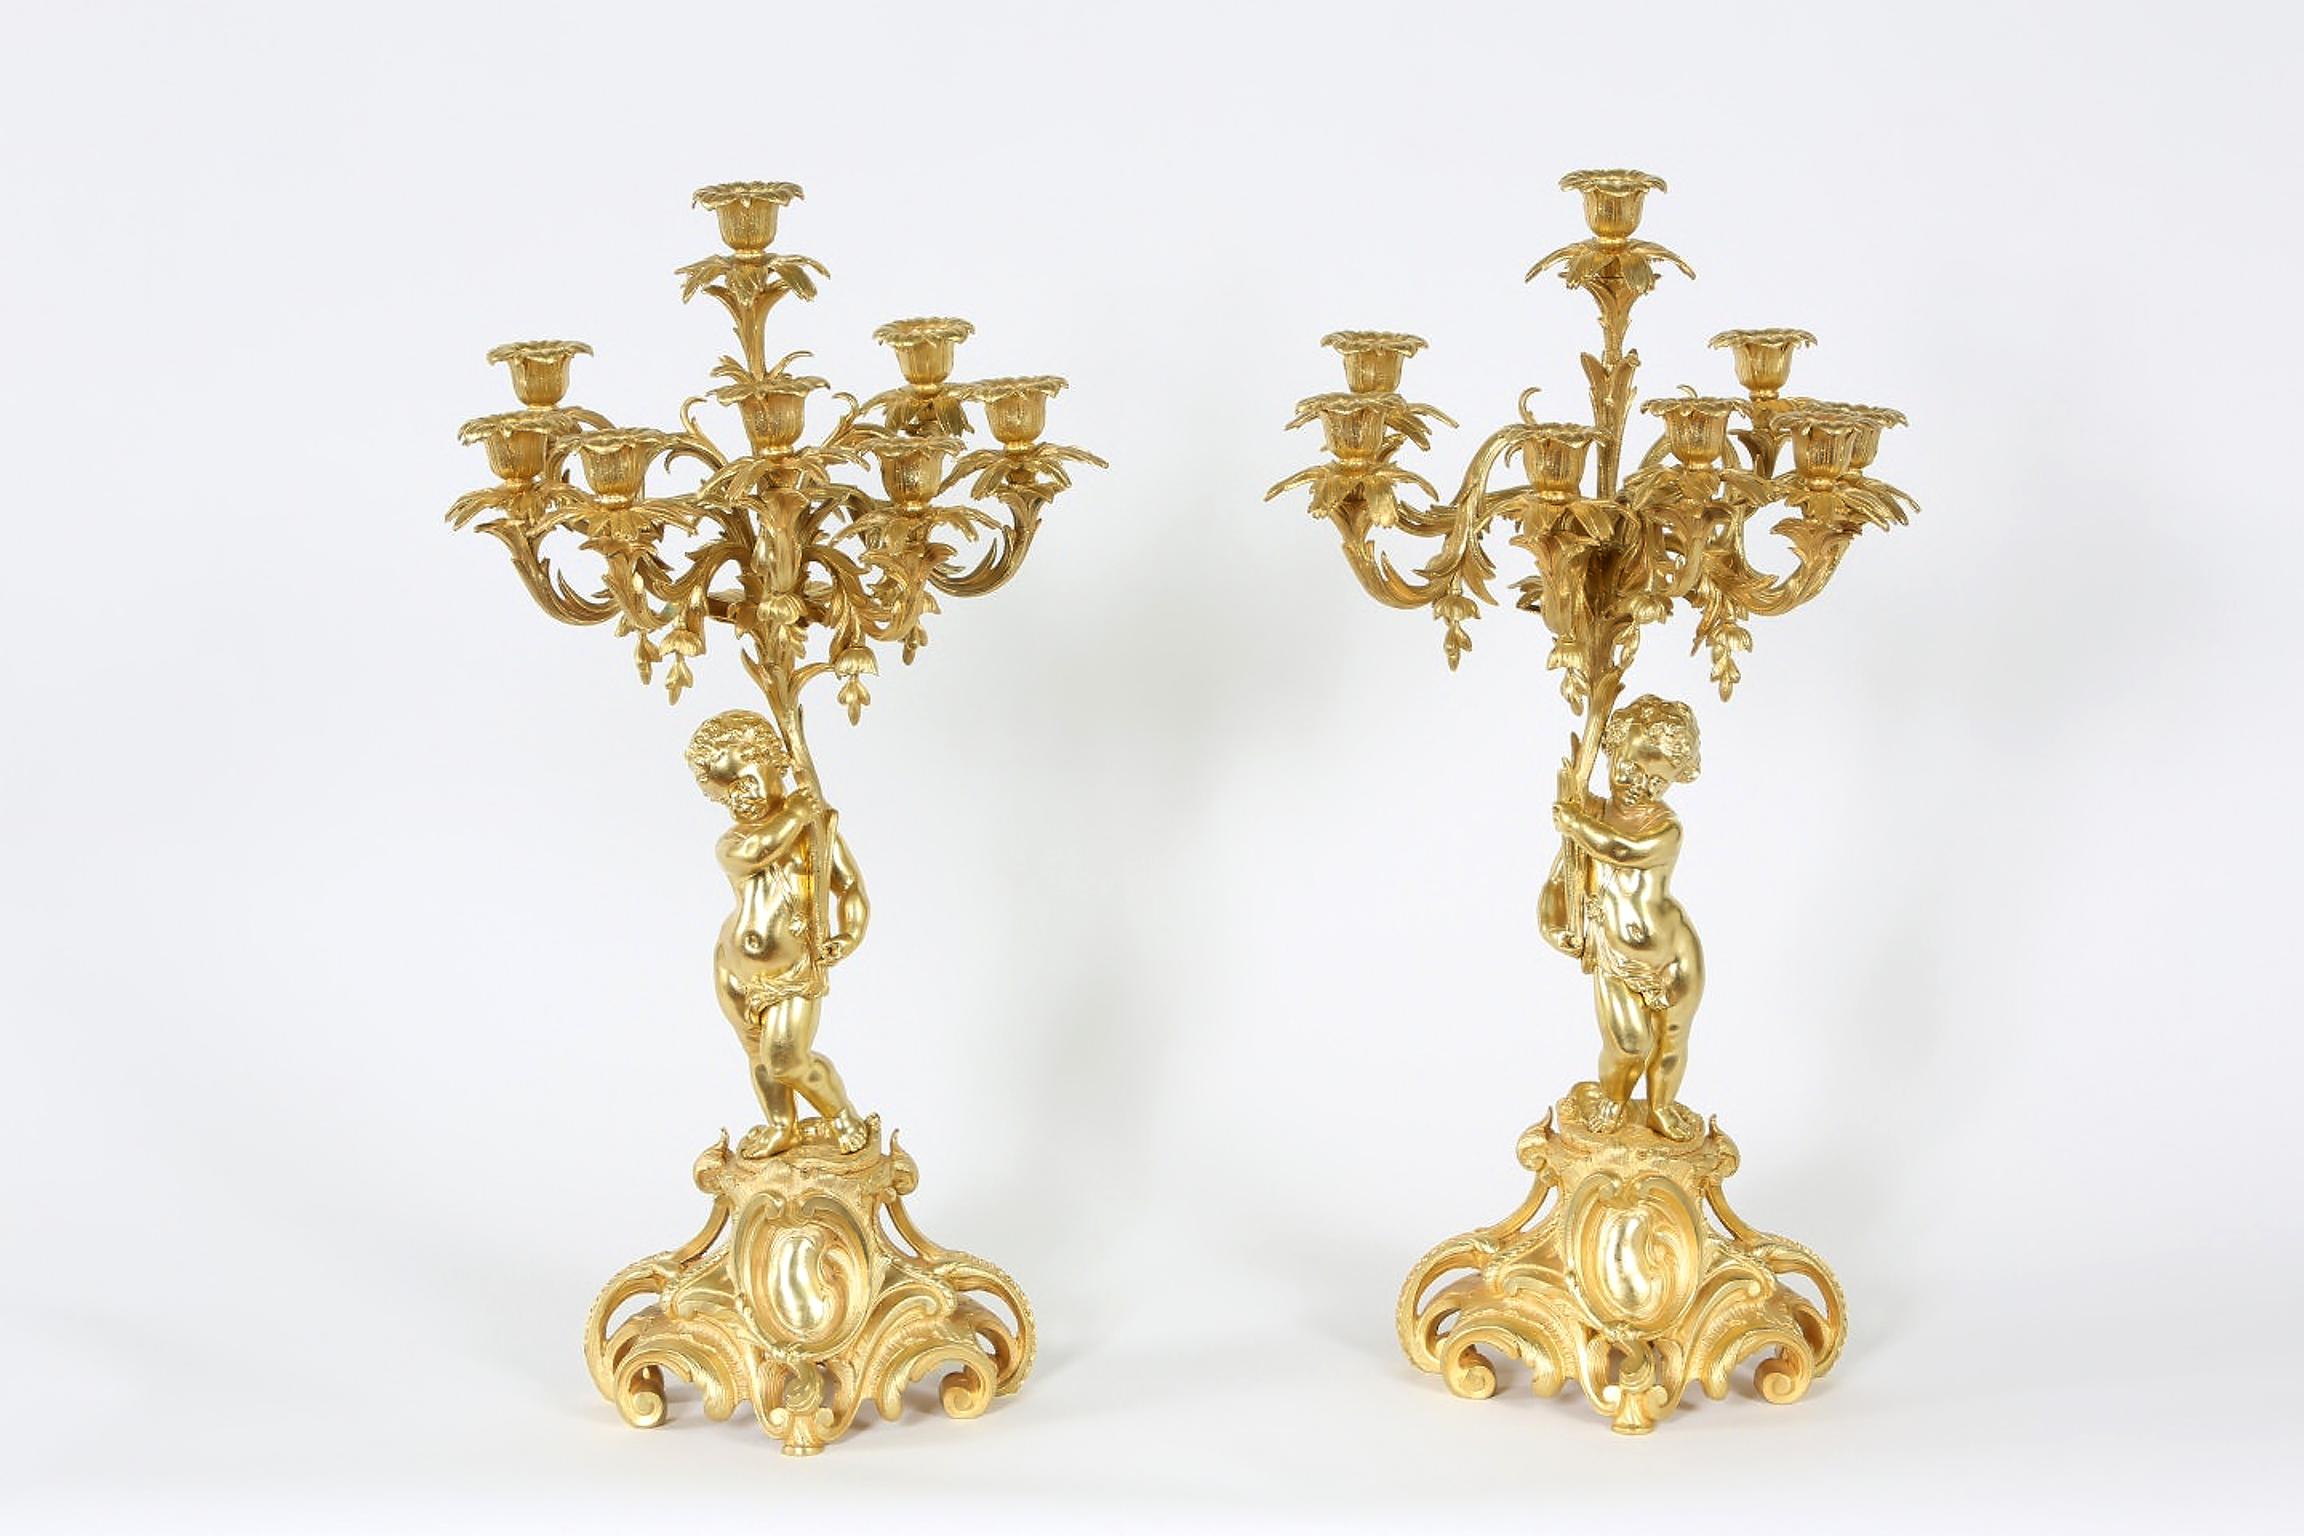 Pair of eight armed gilt bronze centerpiece candelabras with standing Putti atop scroll form base & exterior design details. Each candelabra is in great condition. Each one measure about 25 inches high x 9 inches diameter. Minor wear appropriate